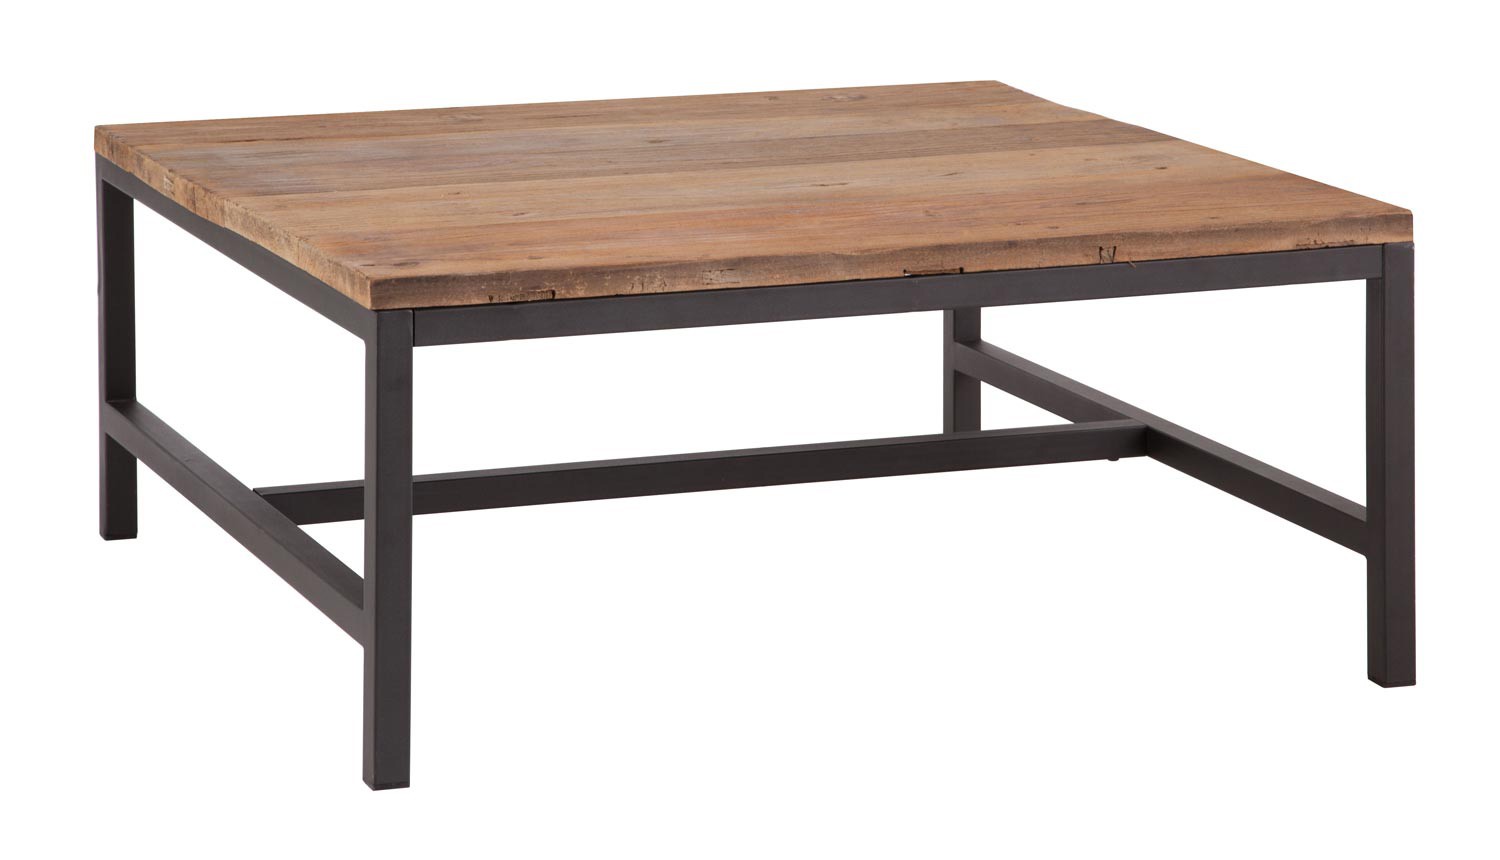 Zuo Modern Gilman Square Coffee Table - Distressed Natural